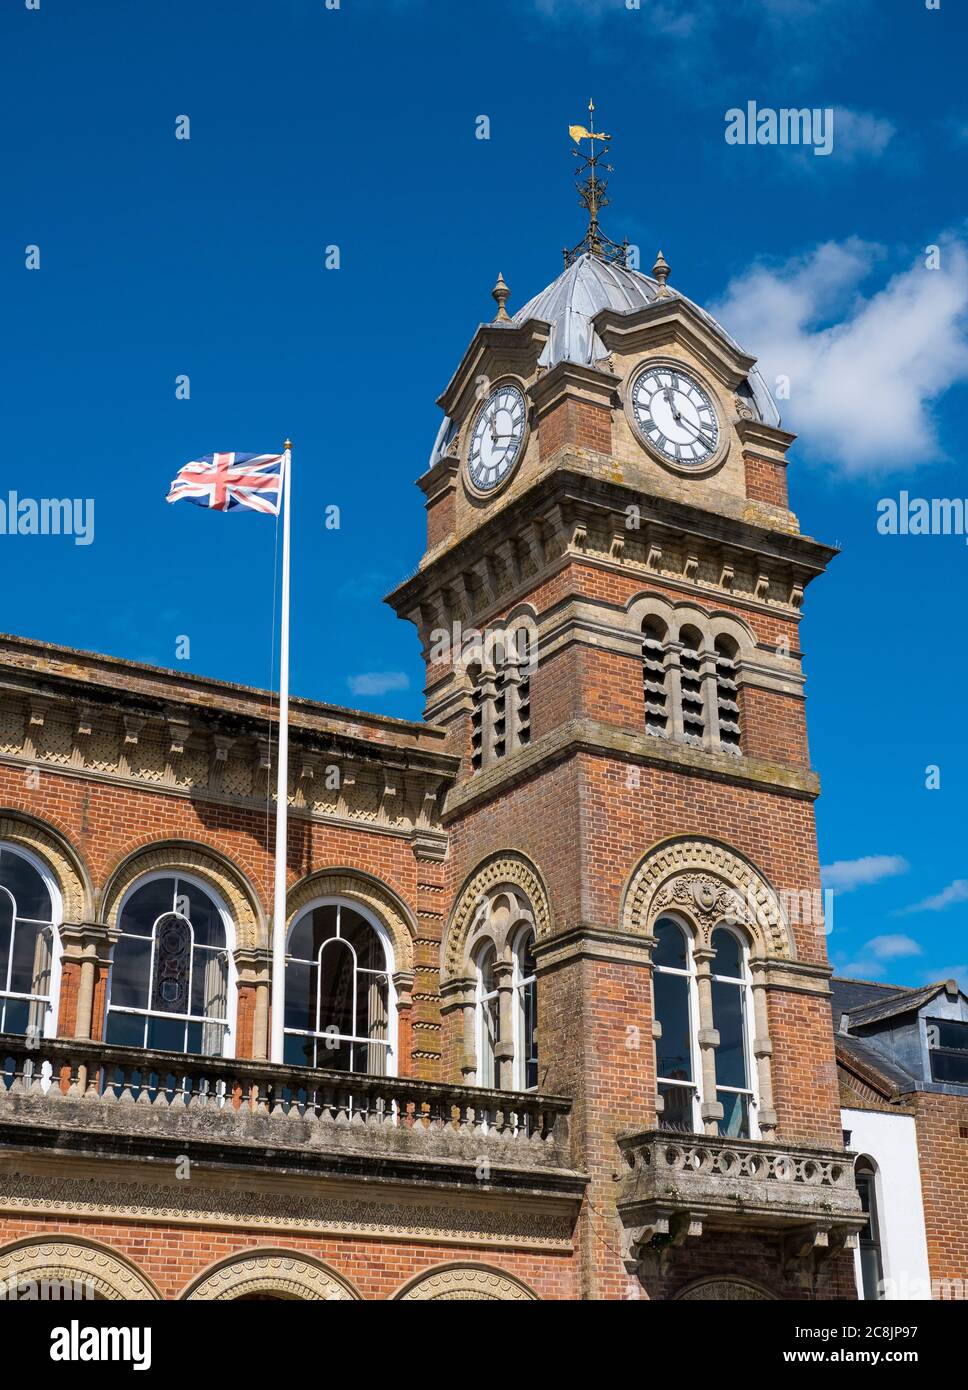 Hungerford Town Hall, Hungerford, Berkshire, England, UK, GB. Stock Photo